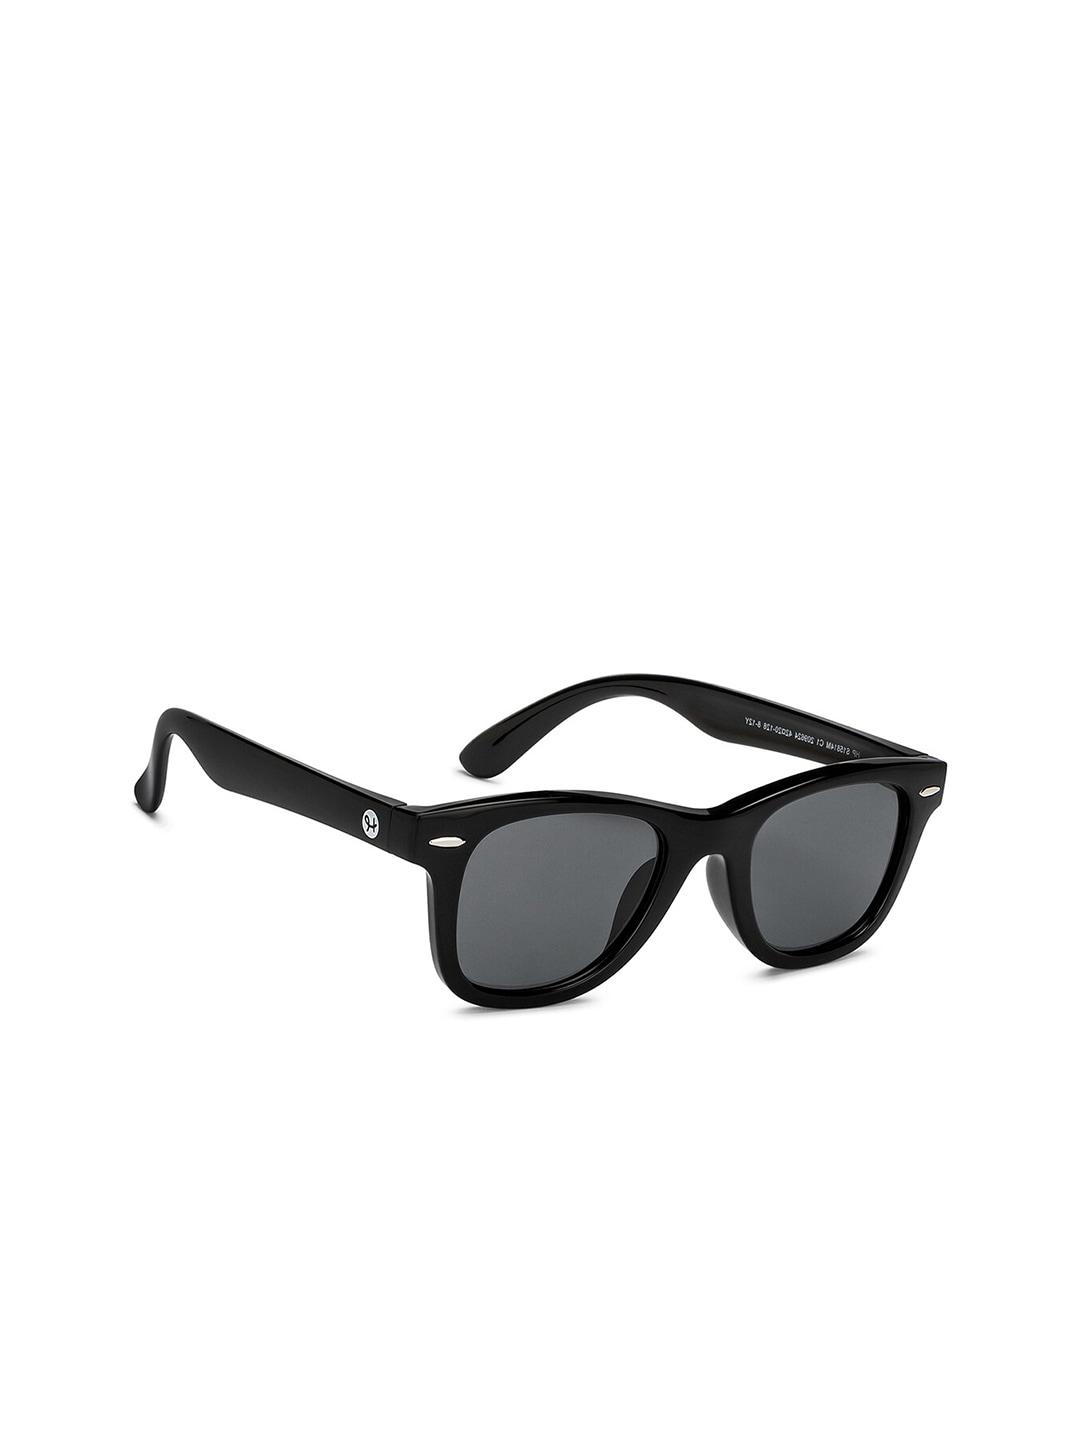 hooper-boys-square-sunglasses-with-polarised-and-uv-protected-lens-209624